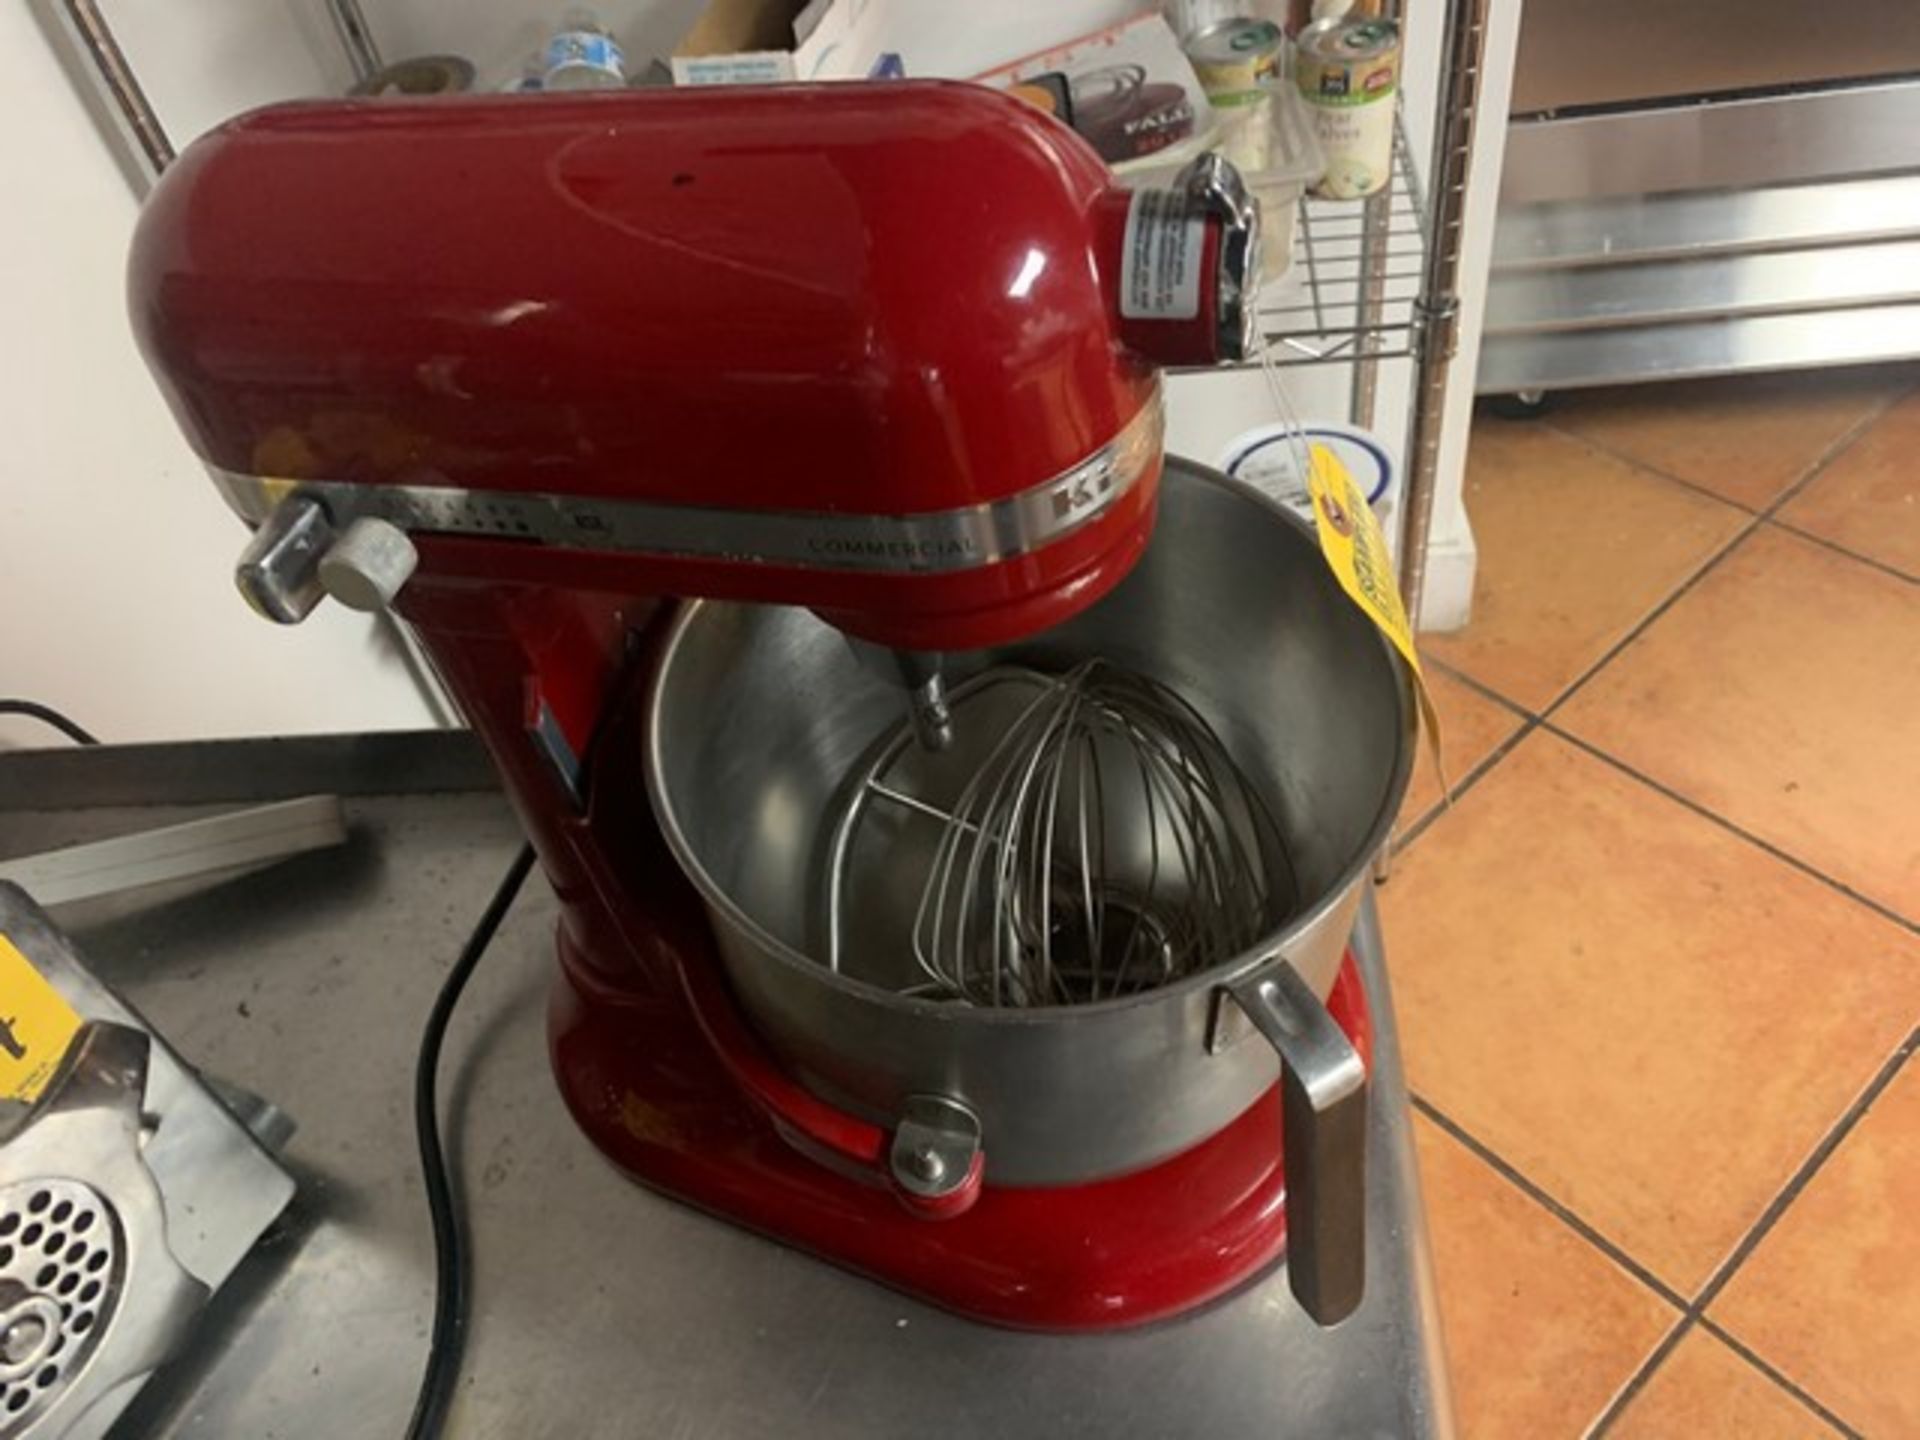 RED KITCHENAID 8 QUART MIXER WITH PADDLE, HOOK & WHIP - Image 2 of 2